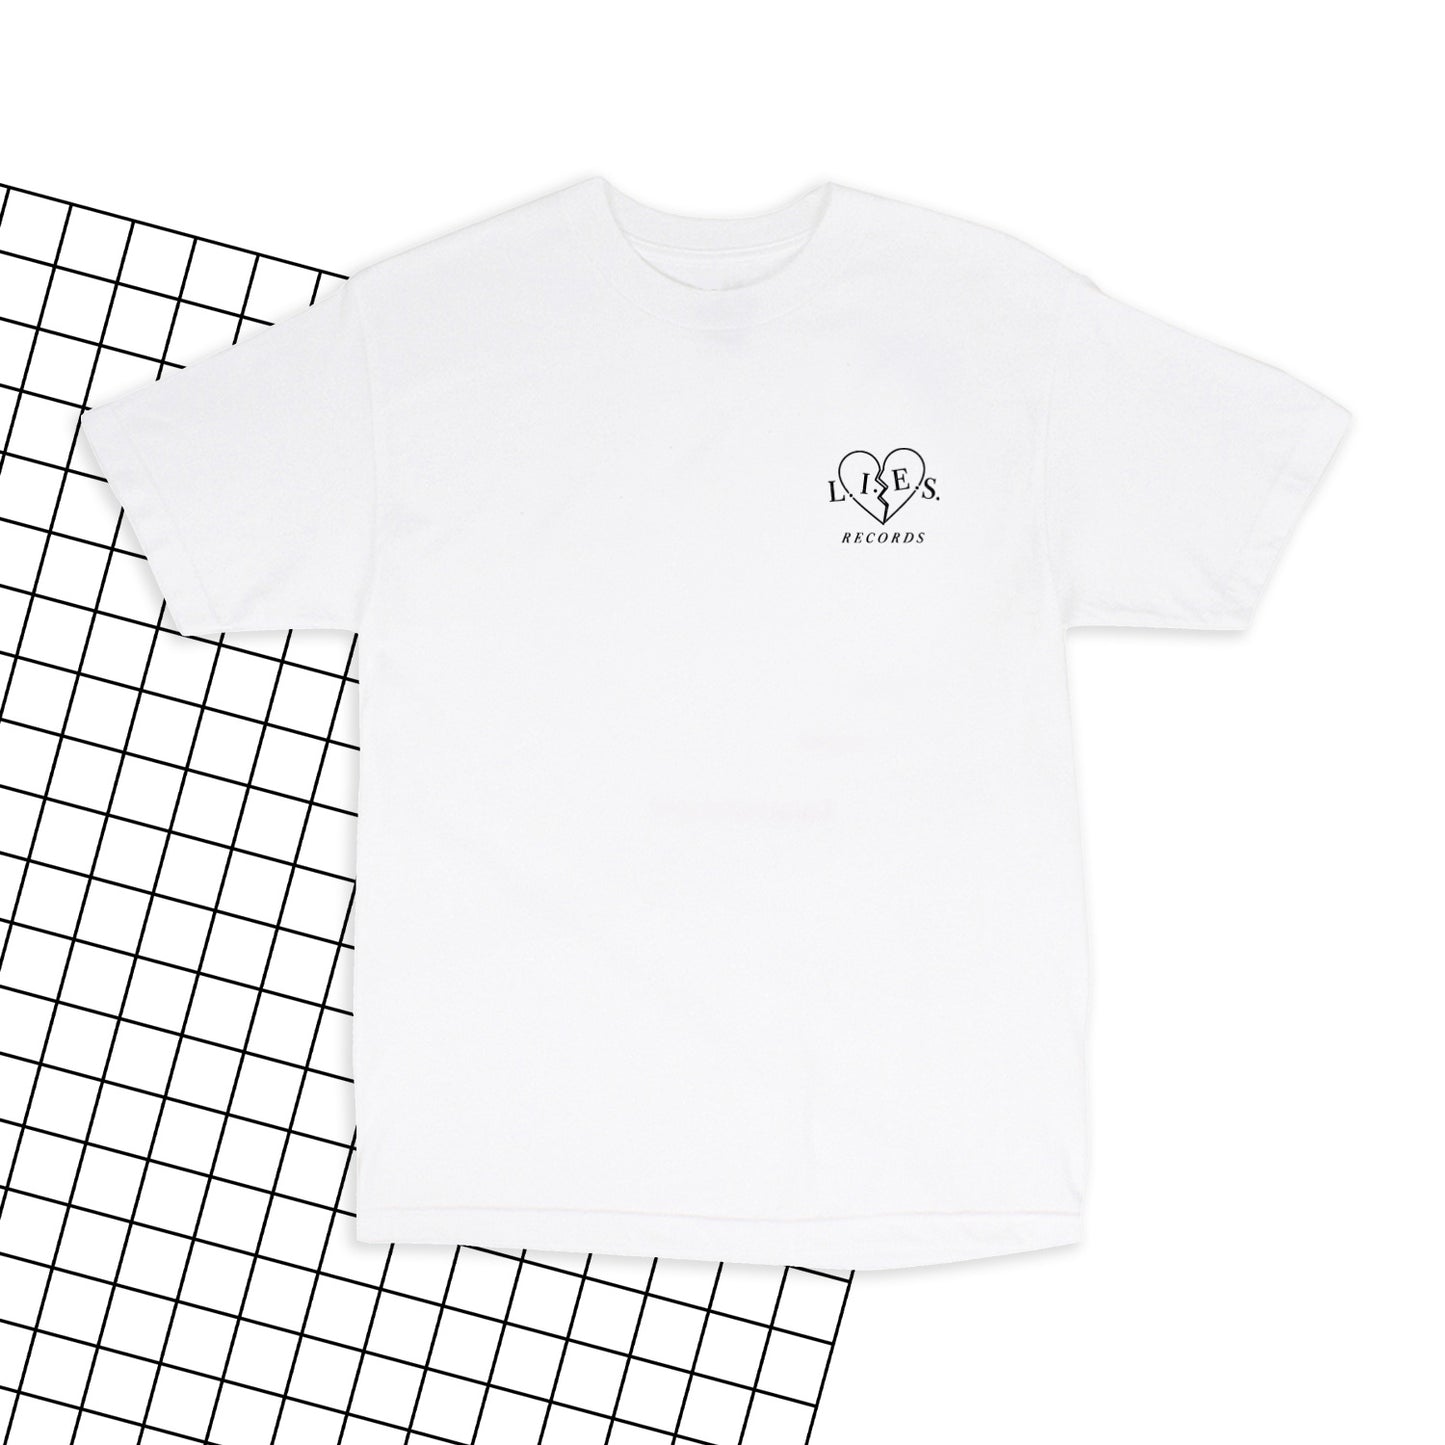 Tangled Trap of Love - S/S Tee - White